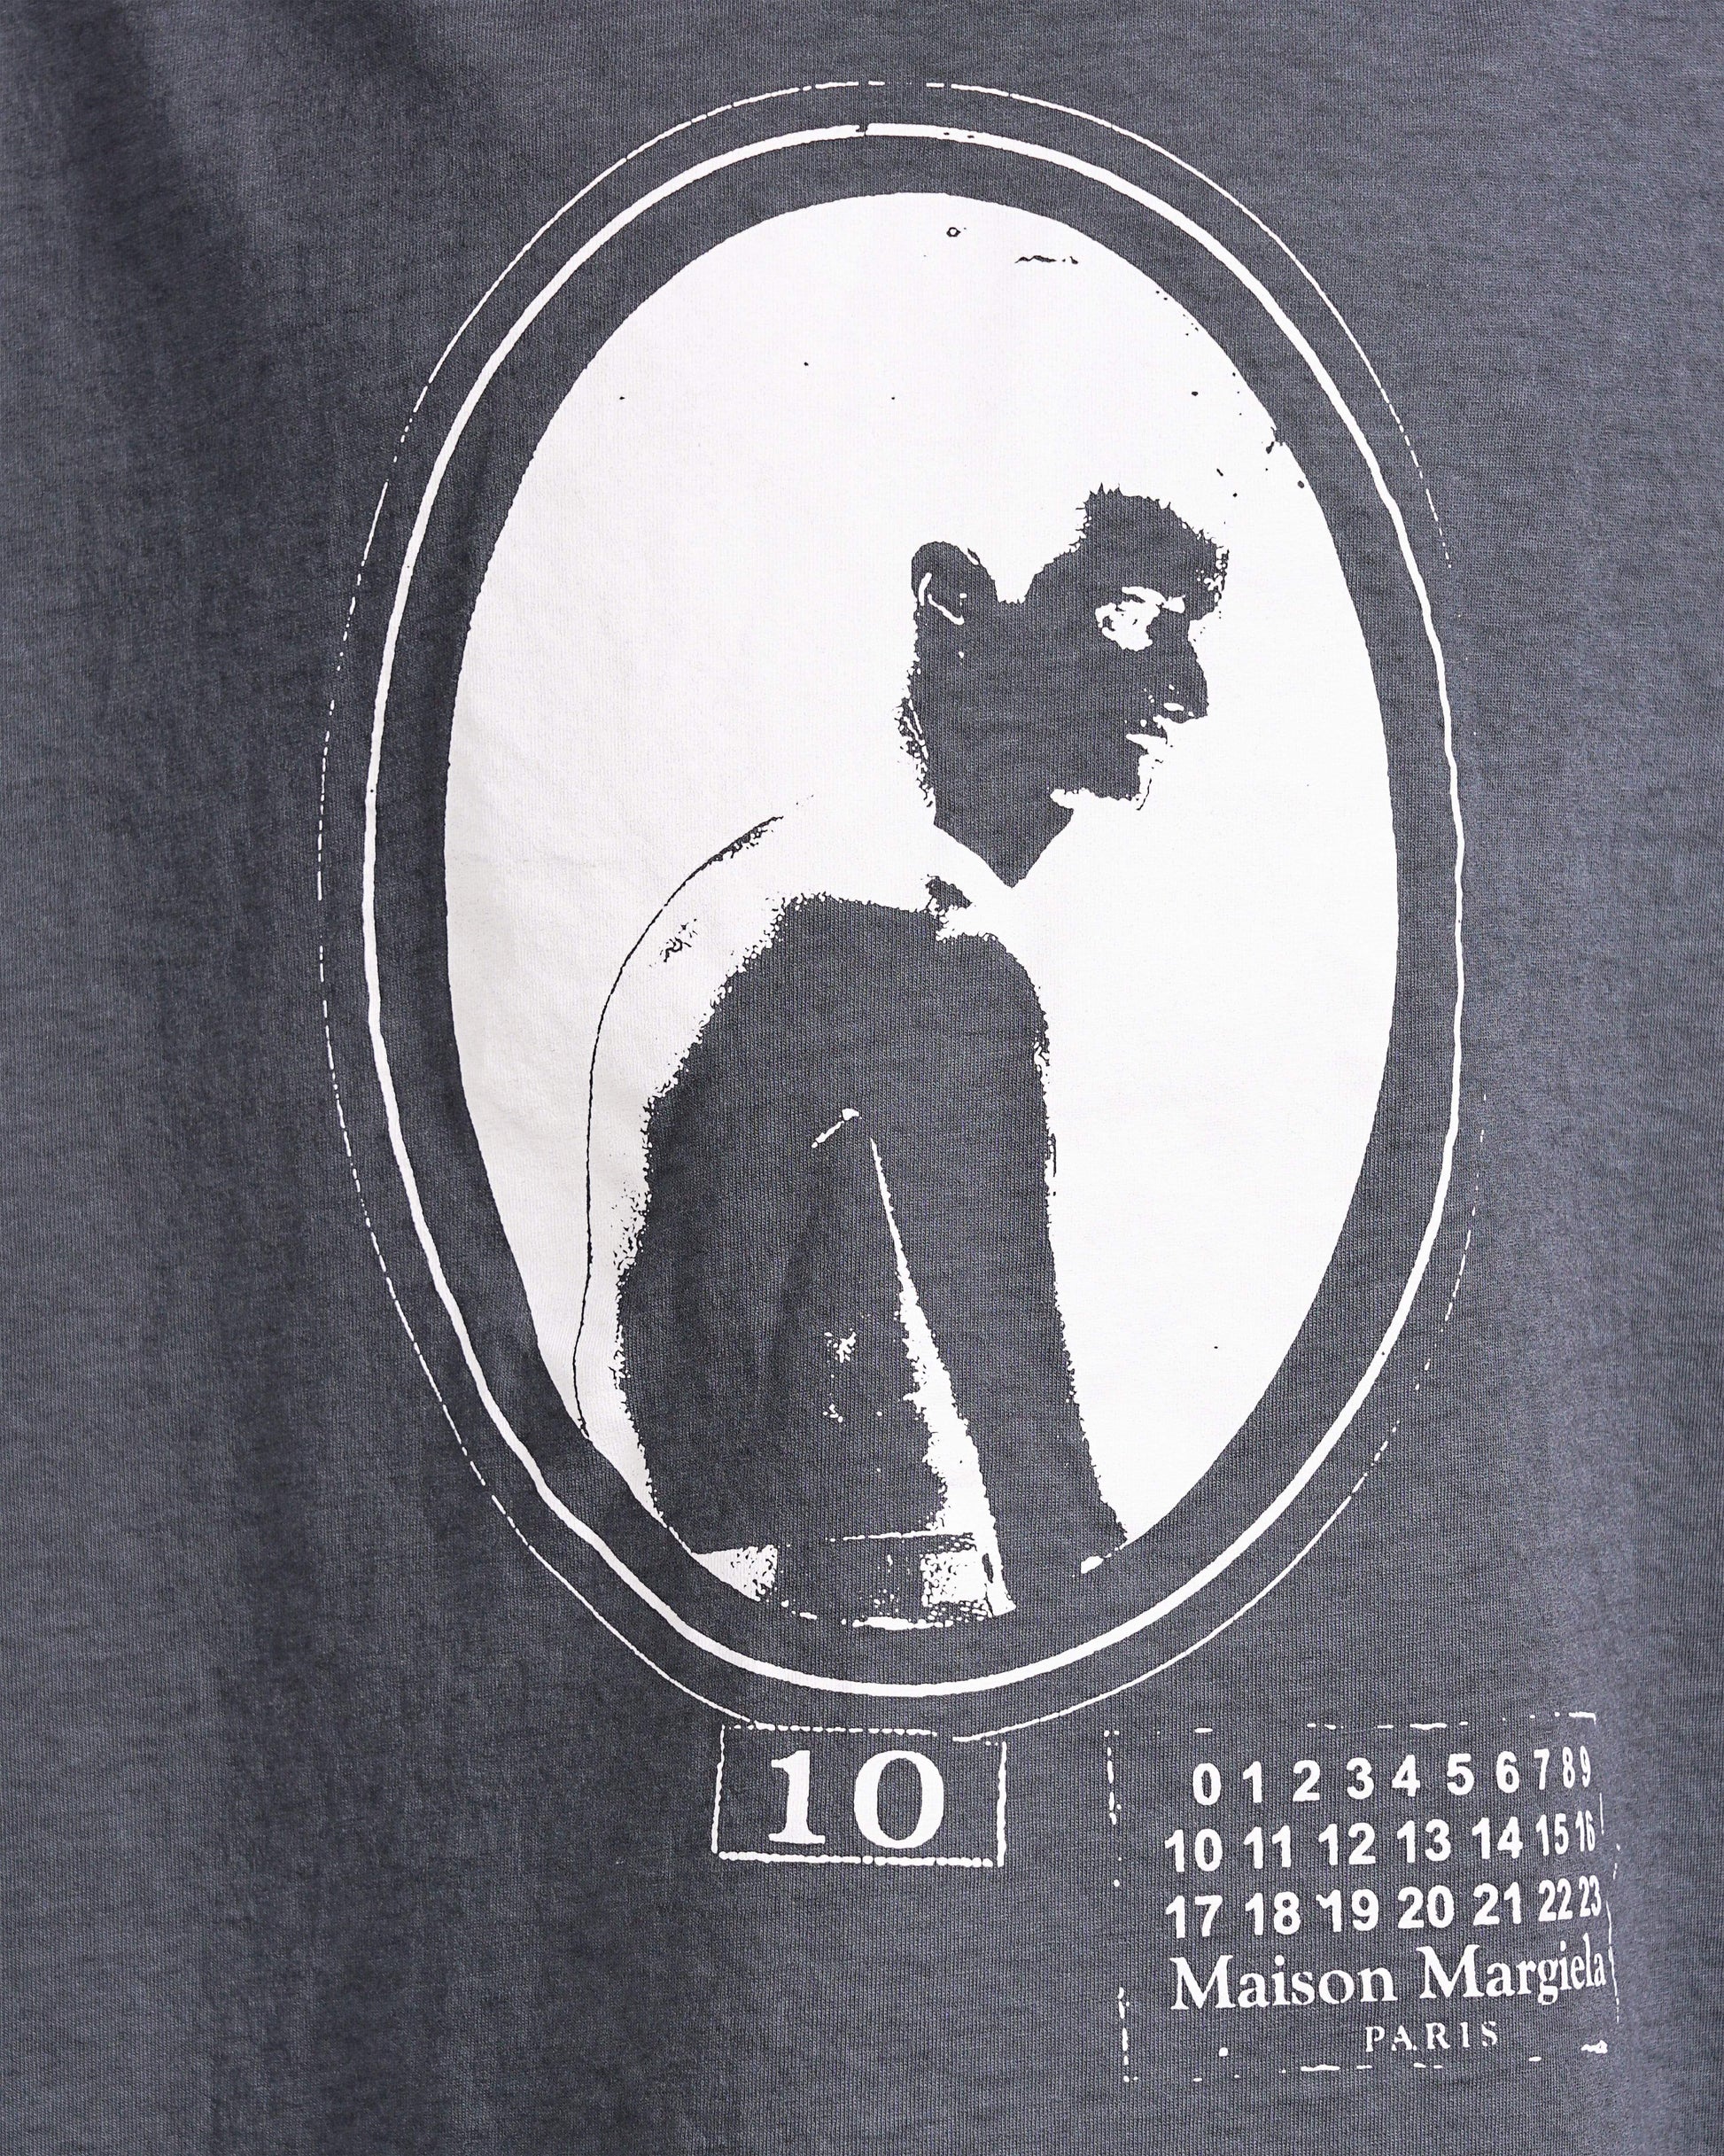 Maison Margiela Men's T-Shirts Silhouette Print Tee in Anthracite